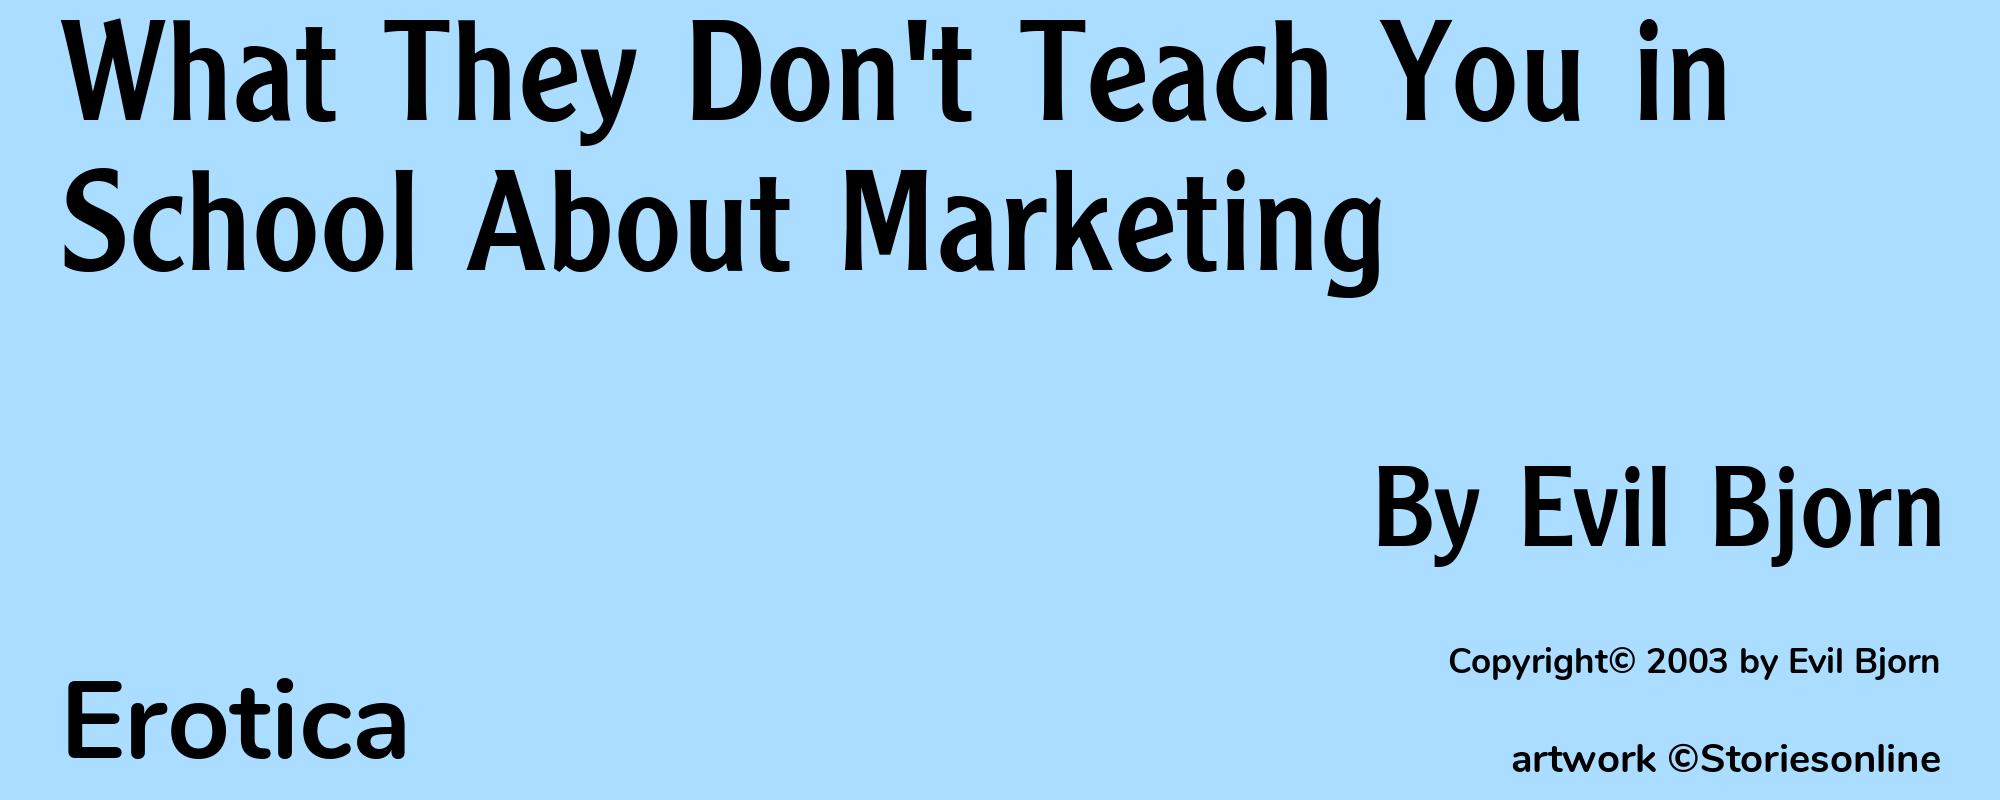 What They Don't Teach You in School About Marketing - Cover